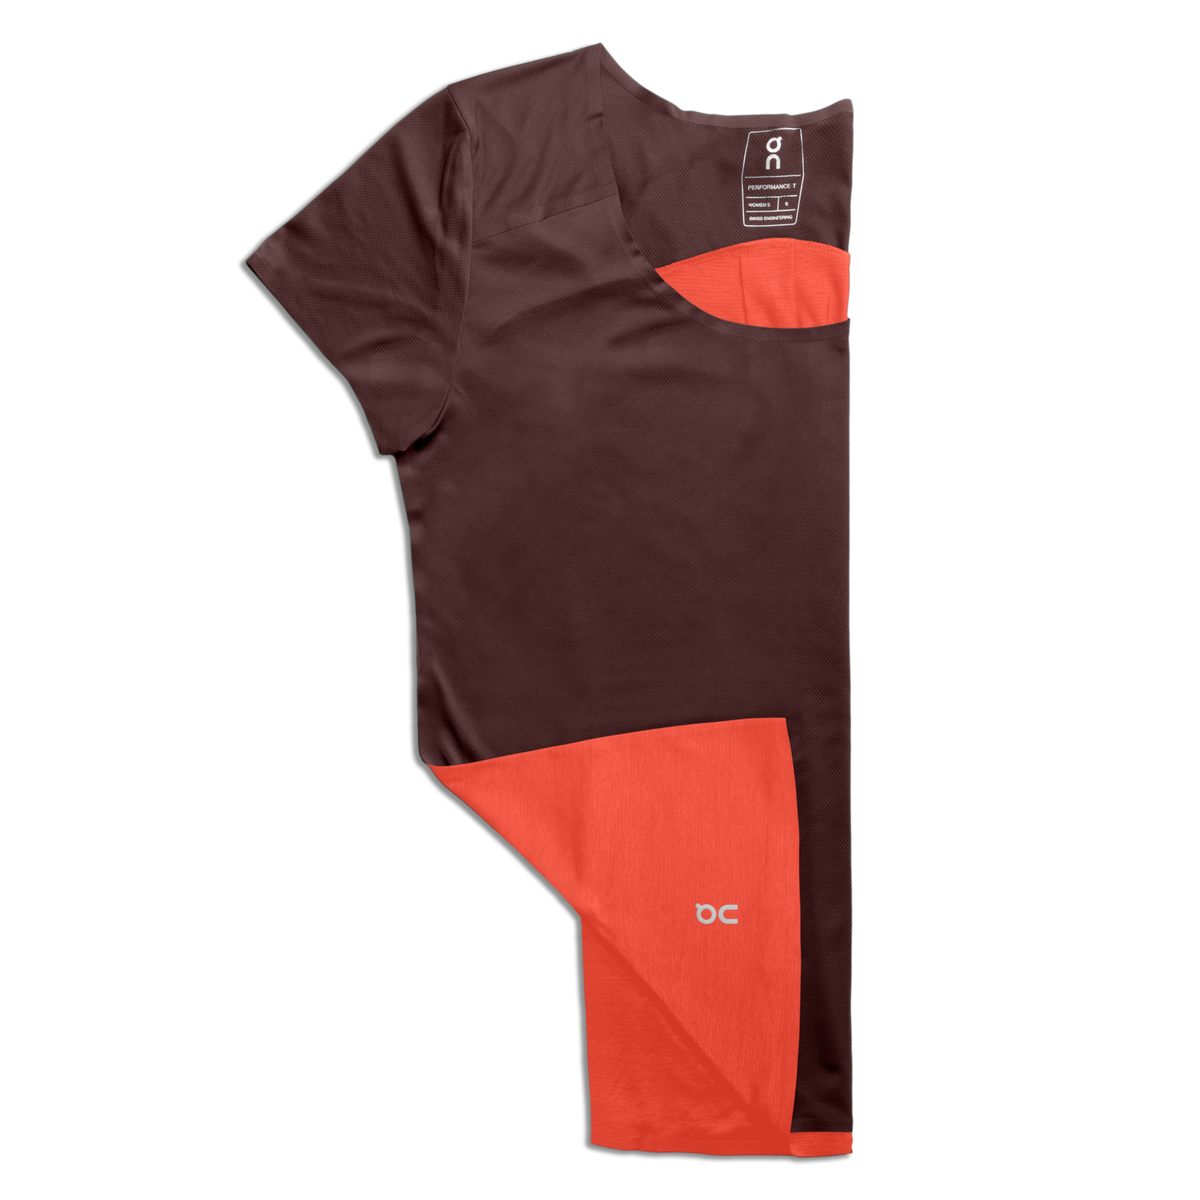 On Performance Tee Womens APPAREL - Womens T-Shirts MULBERRY/SPICE